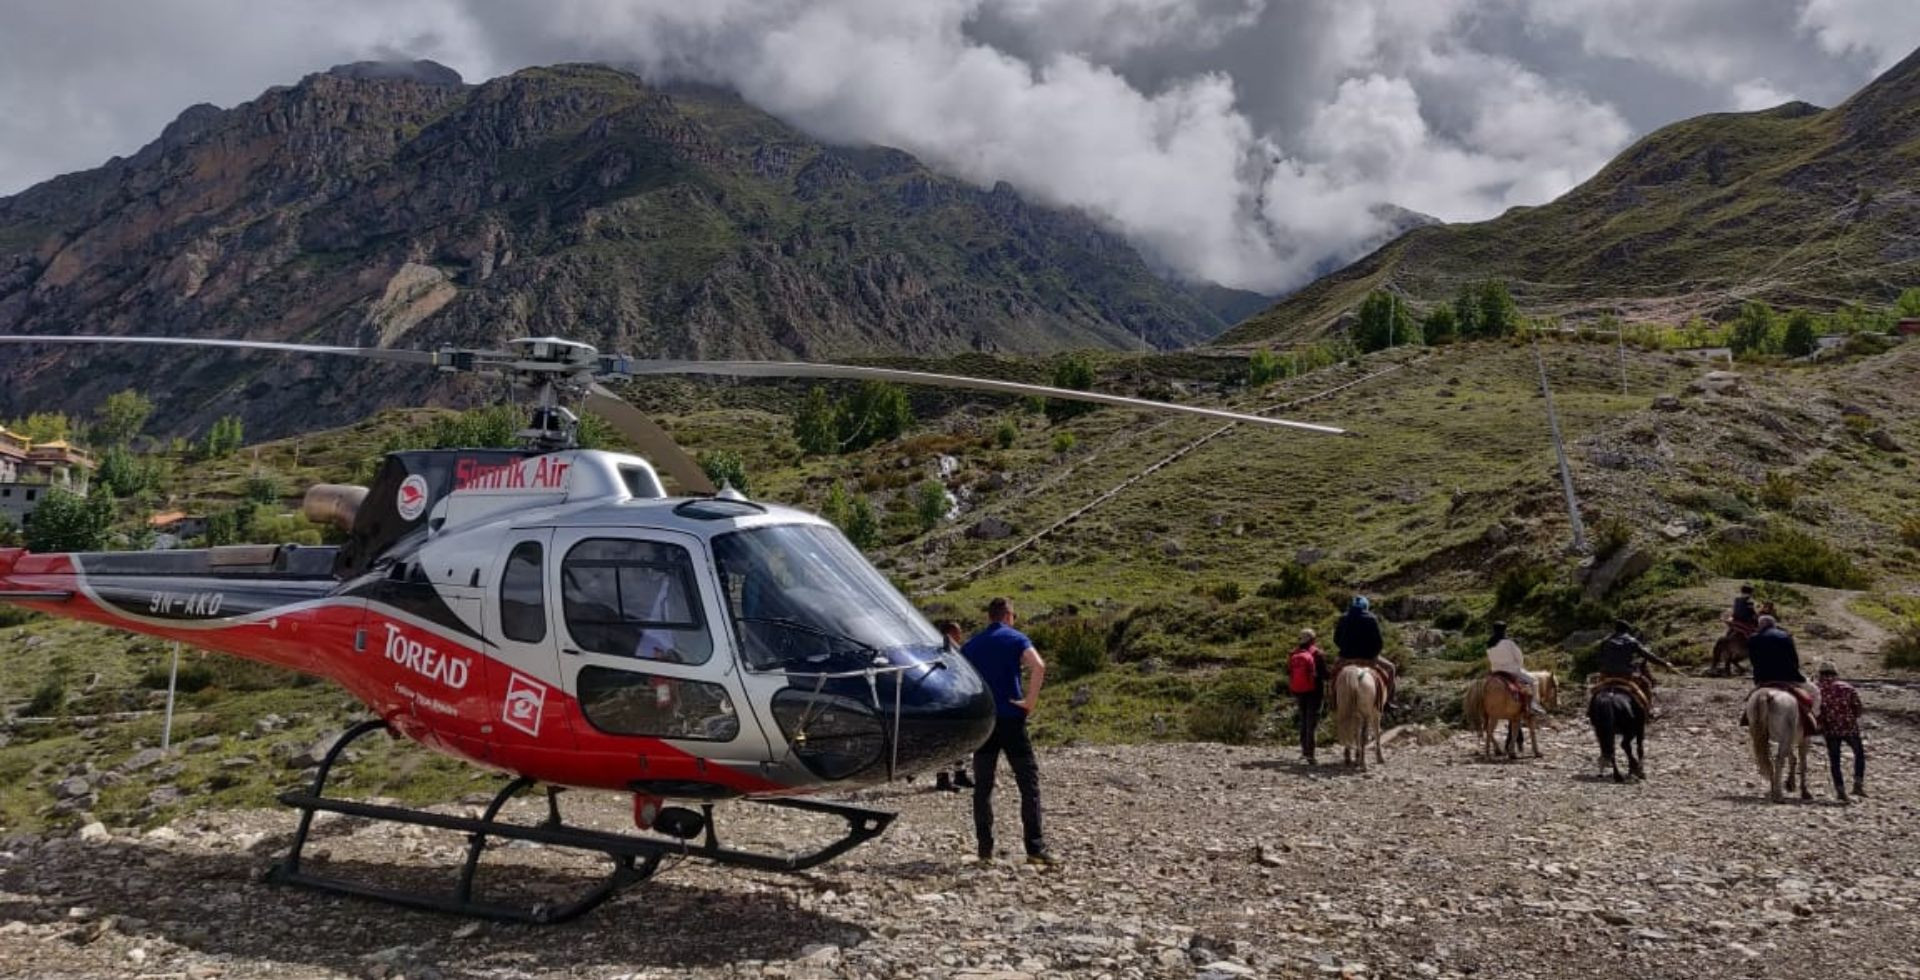 Muktinath Yatra by Helicopter